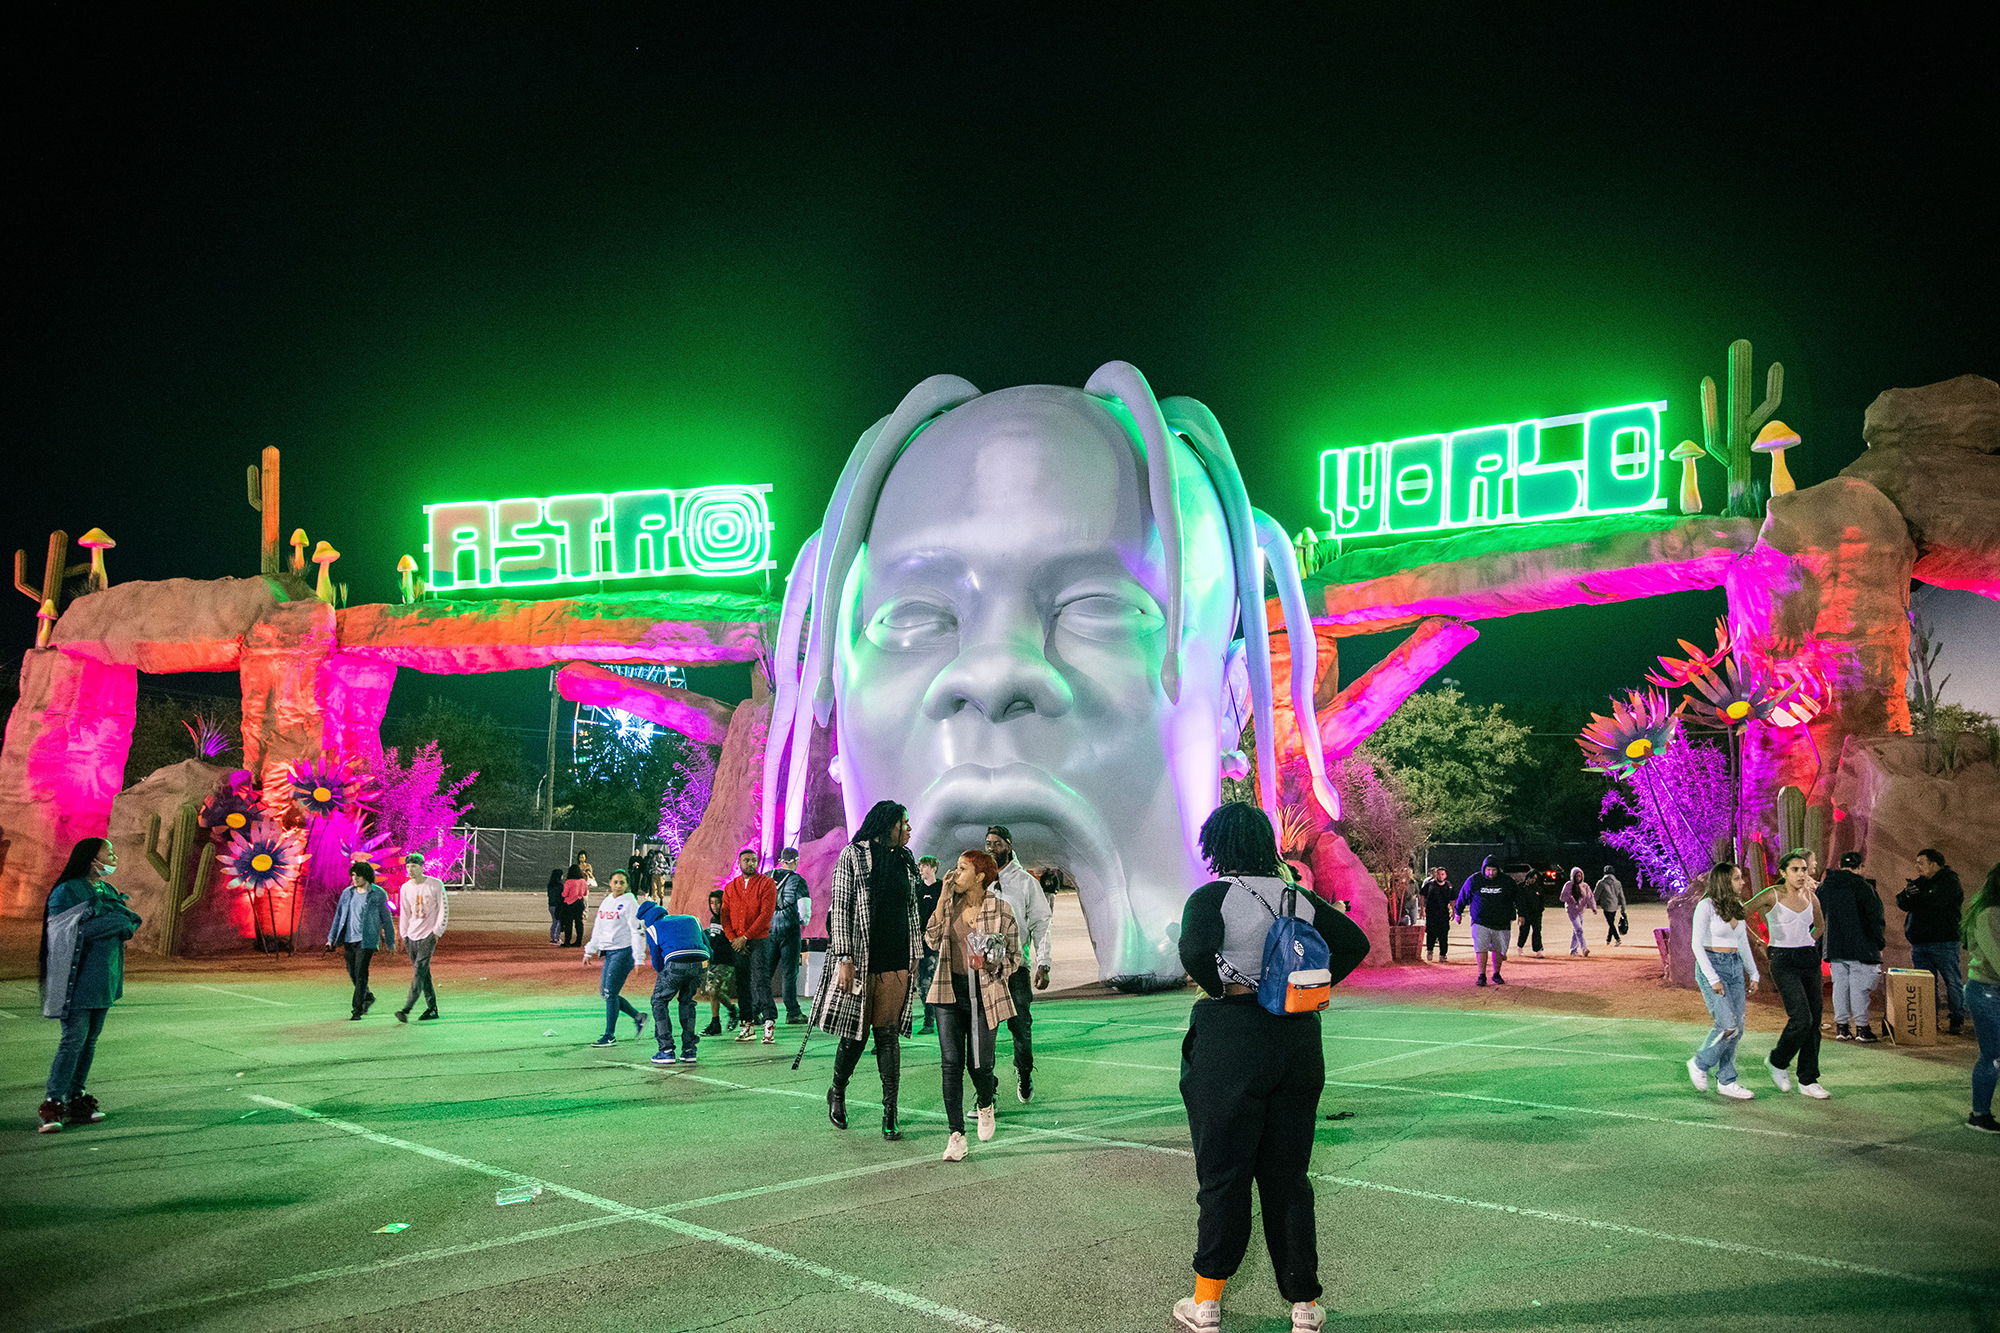 Astroworld Aftermath - What really happened at Travis Scott's